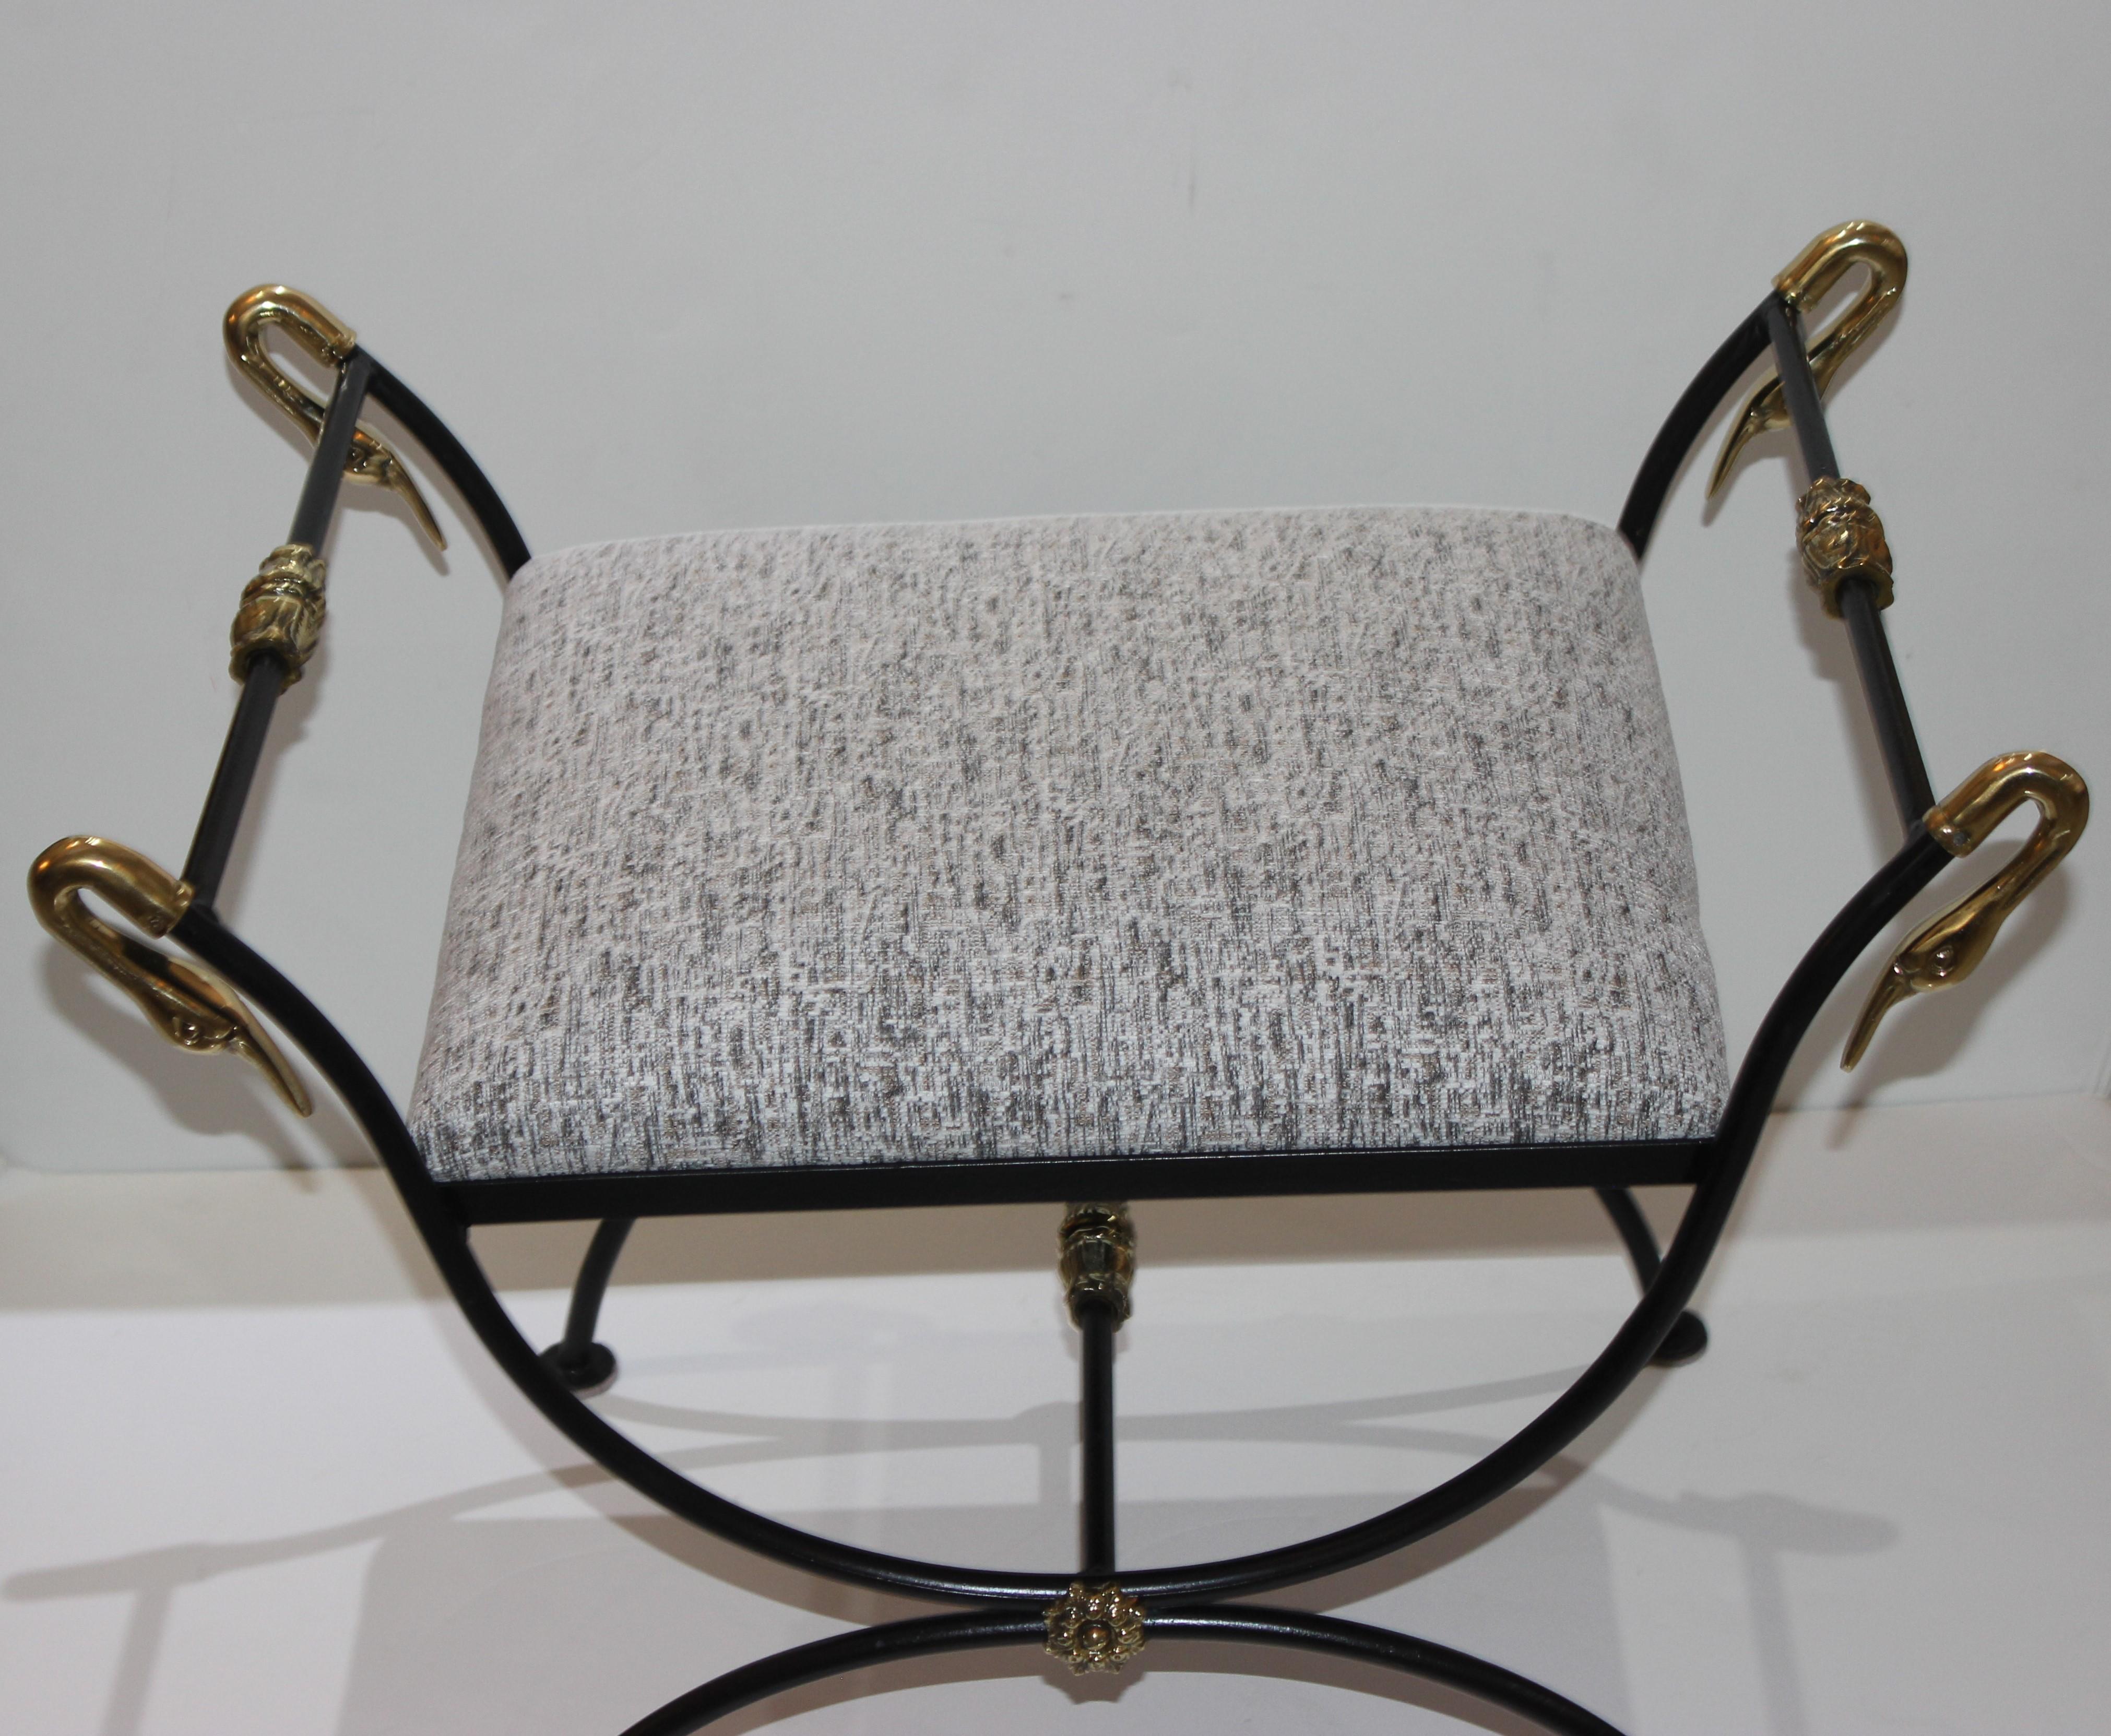 This stylish and chic Maison Jansen style bench is very much in the French Empire Revival look with its Curule-form, black frame and polished brass swan head and medallions.

Note: The slip seat cushion is upholstered (11/2019) in a woven, textured